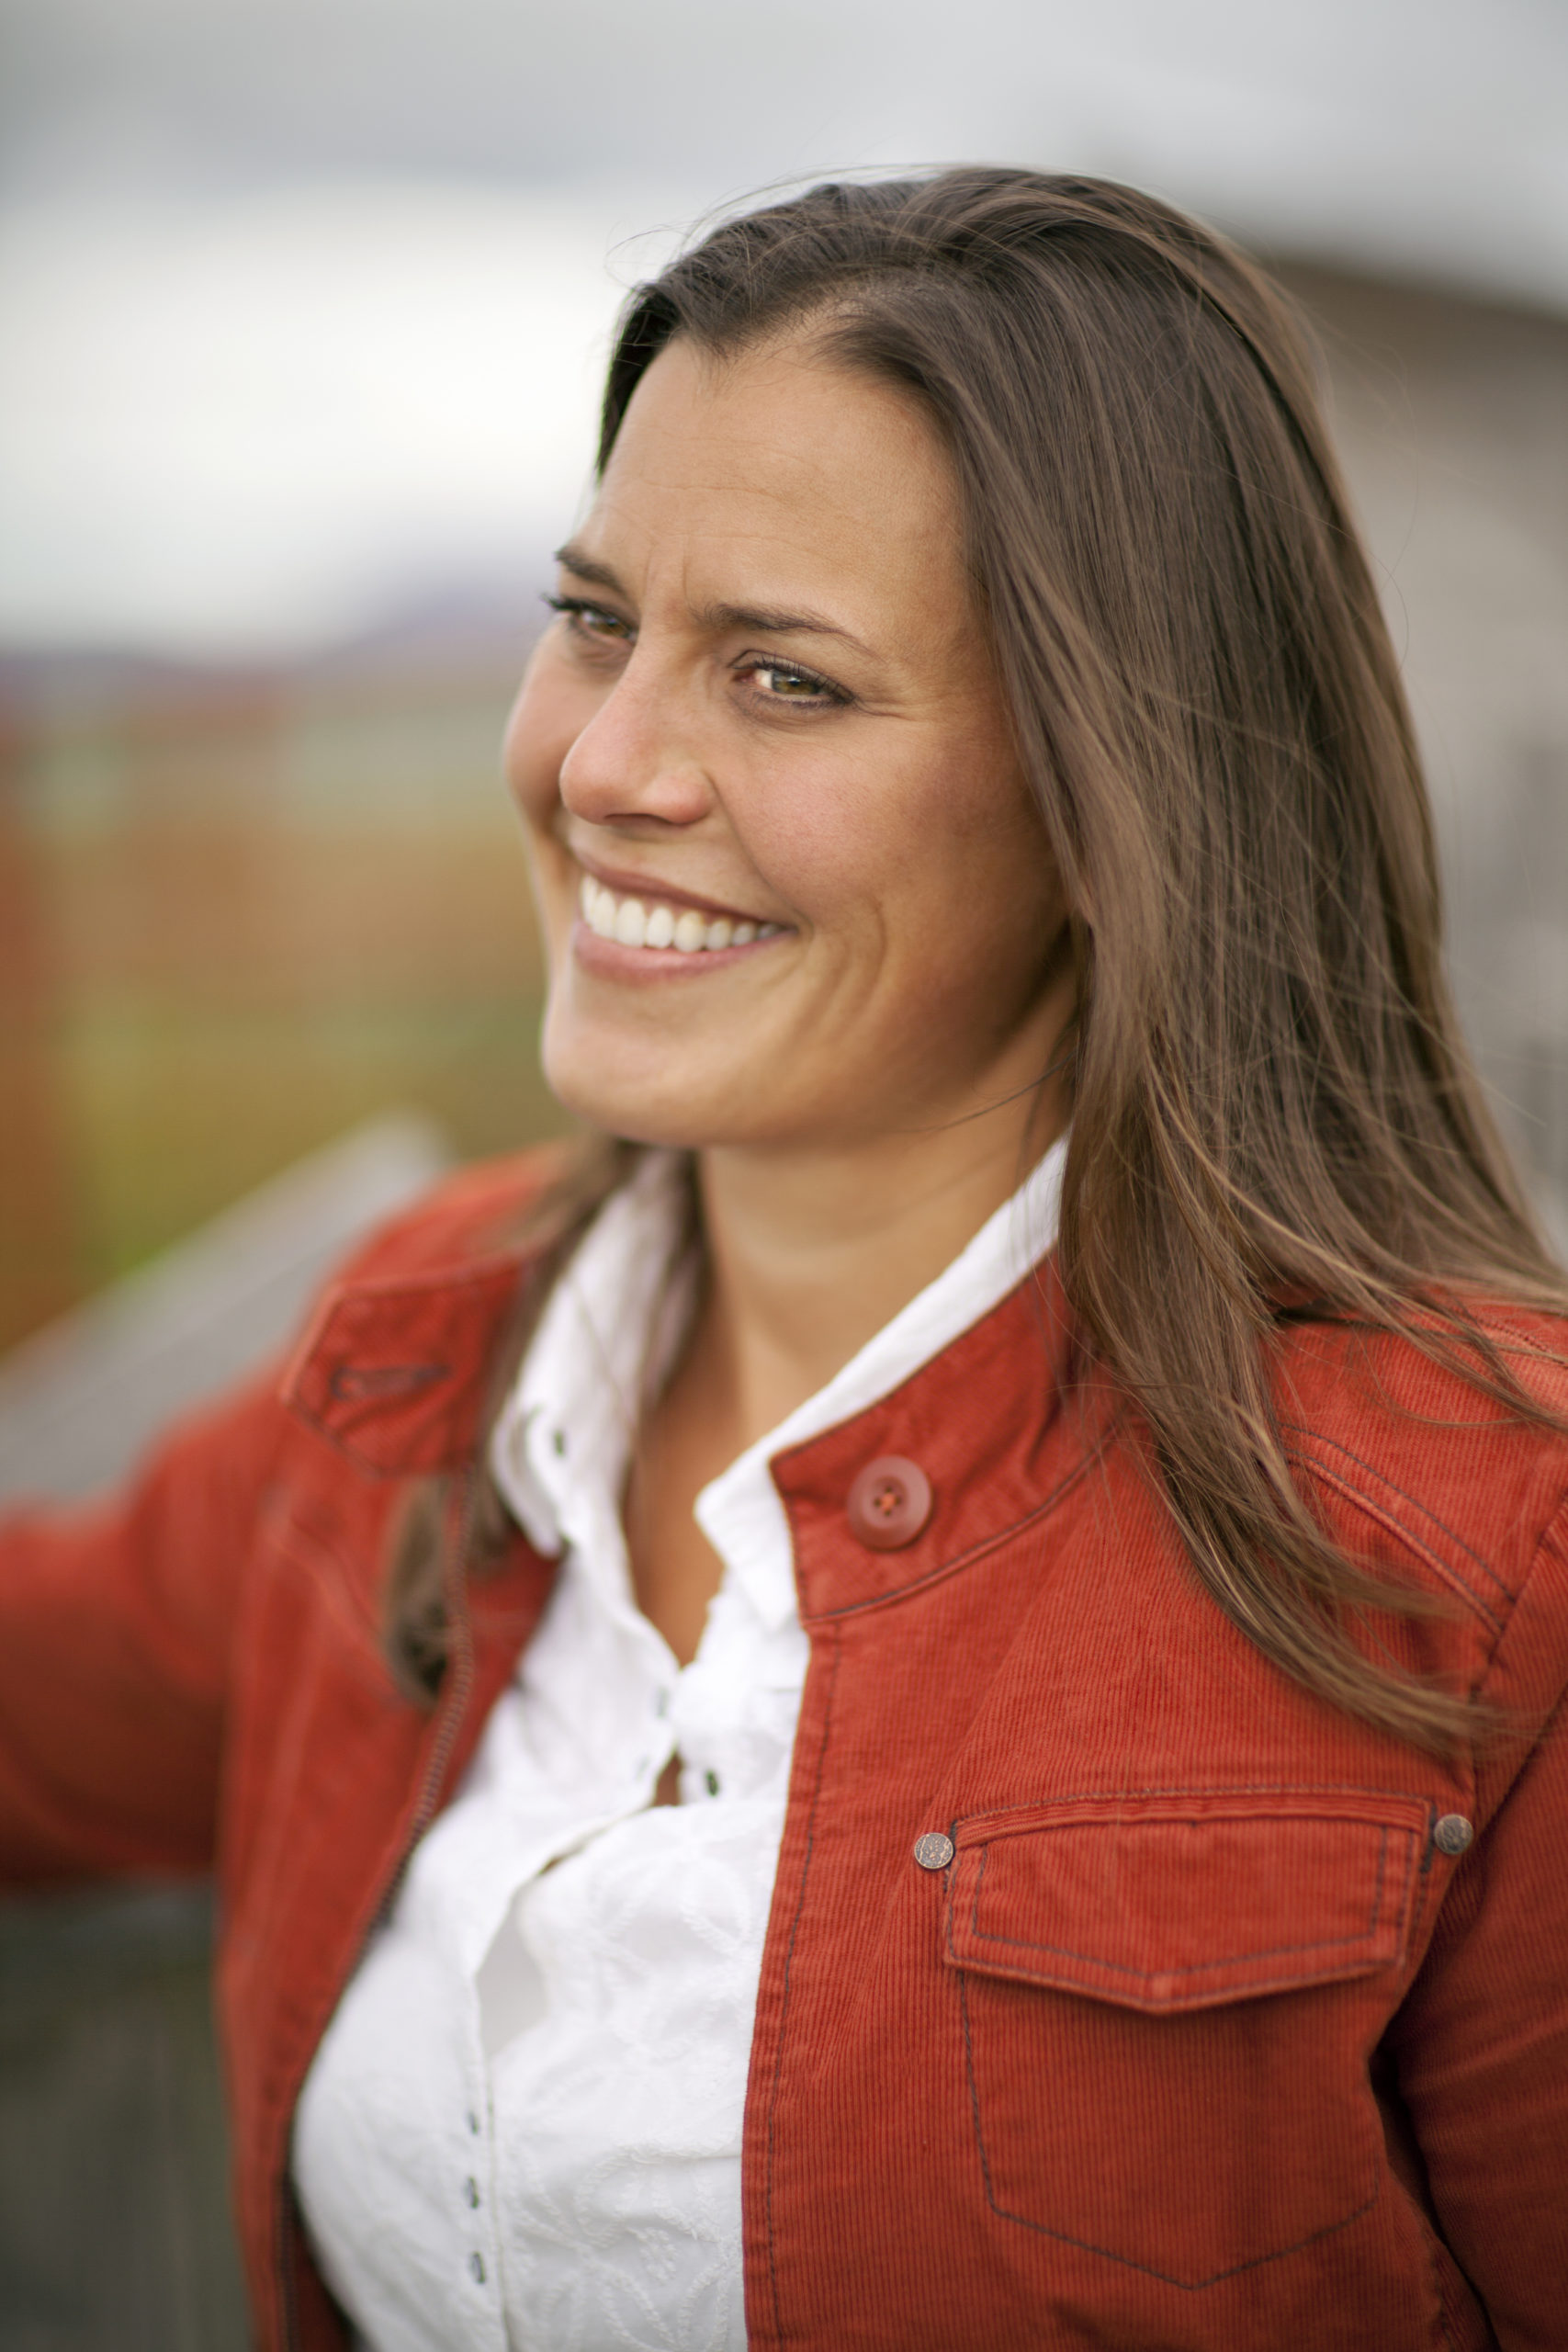 Sarah Calhoun smiling in a red corduroy jacket with a white collared shirt underneath